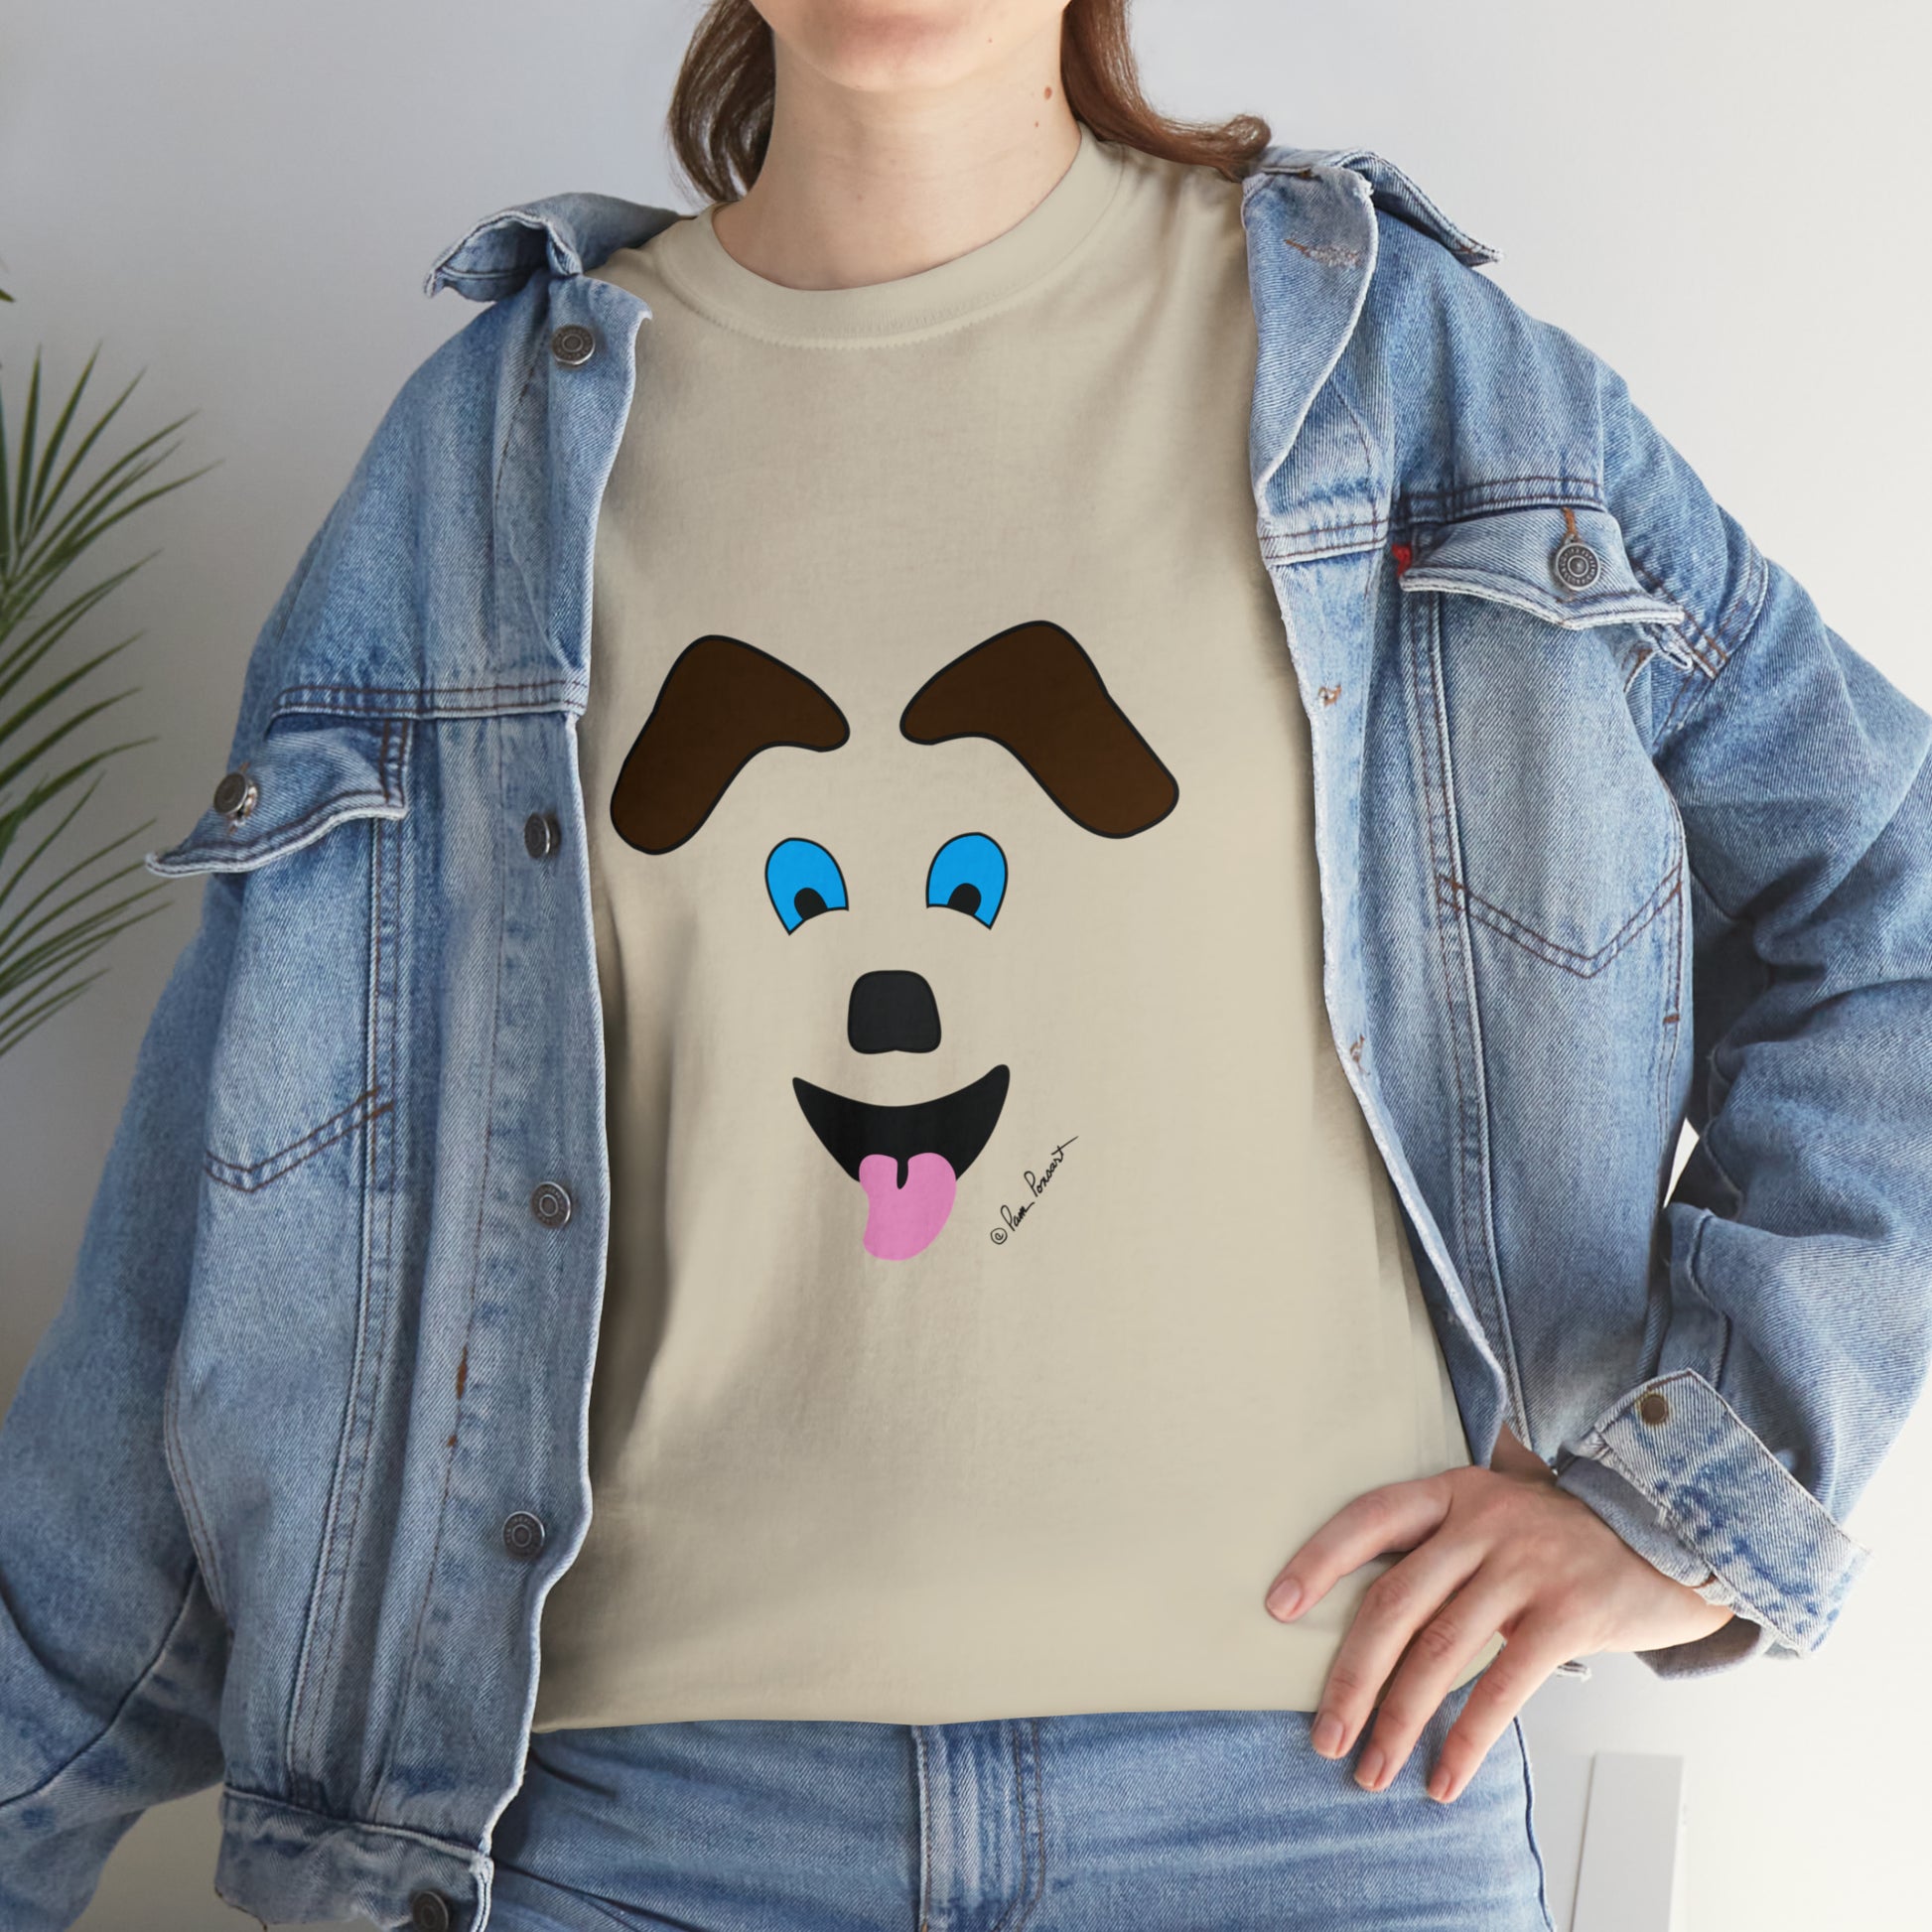 Mock up of a woman wearing the Sand colored shirt under a denim jacket